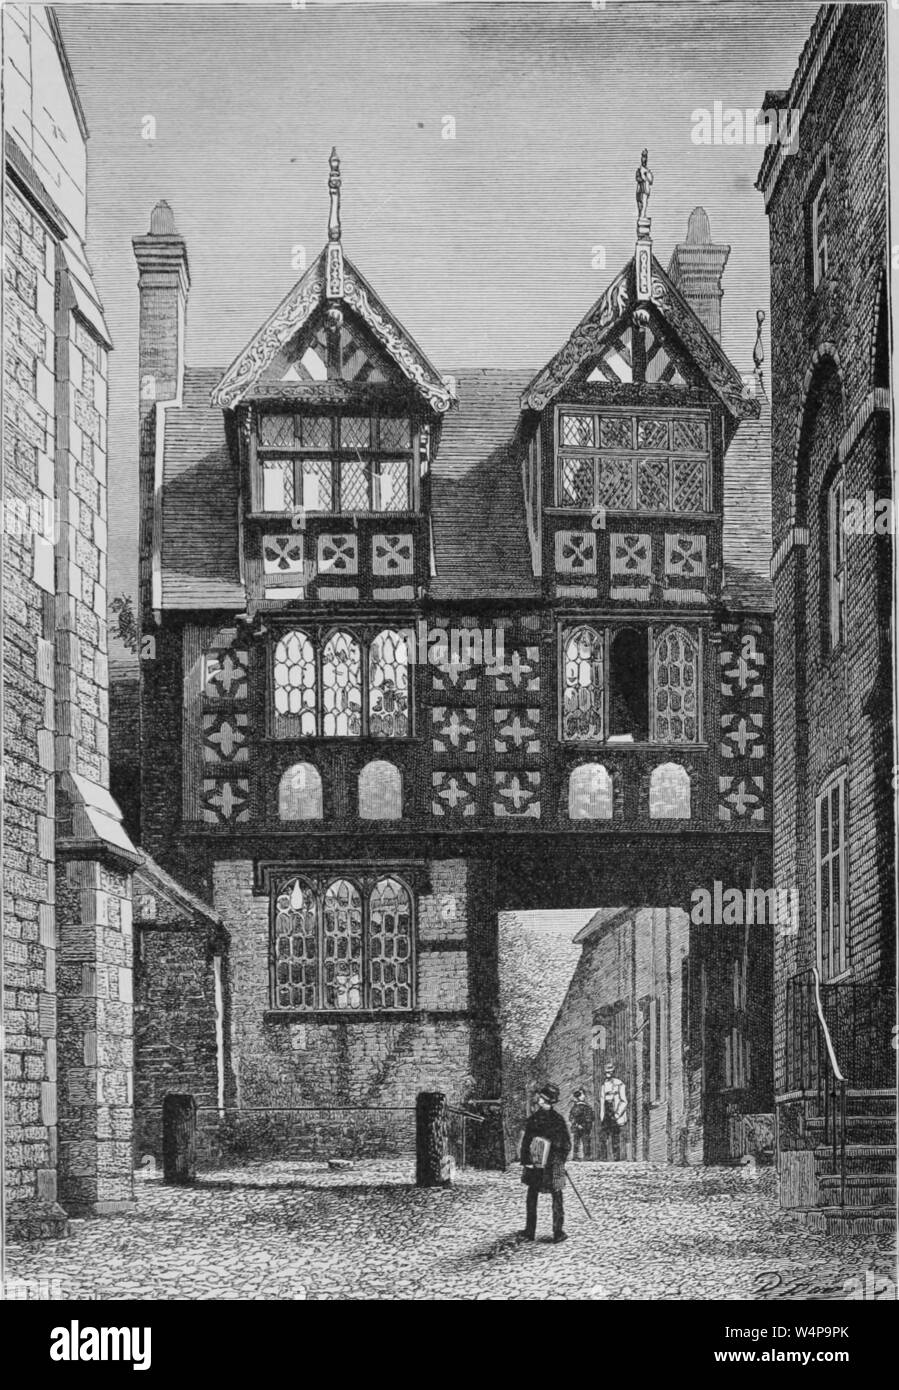 Engraving of the sixteen-century house in Shrewsbury, England, from the book 'The earth and its inhabitants' by Elisee Reclus, 1881. Courtesy Internet Archive. () Stock Photo